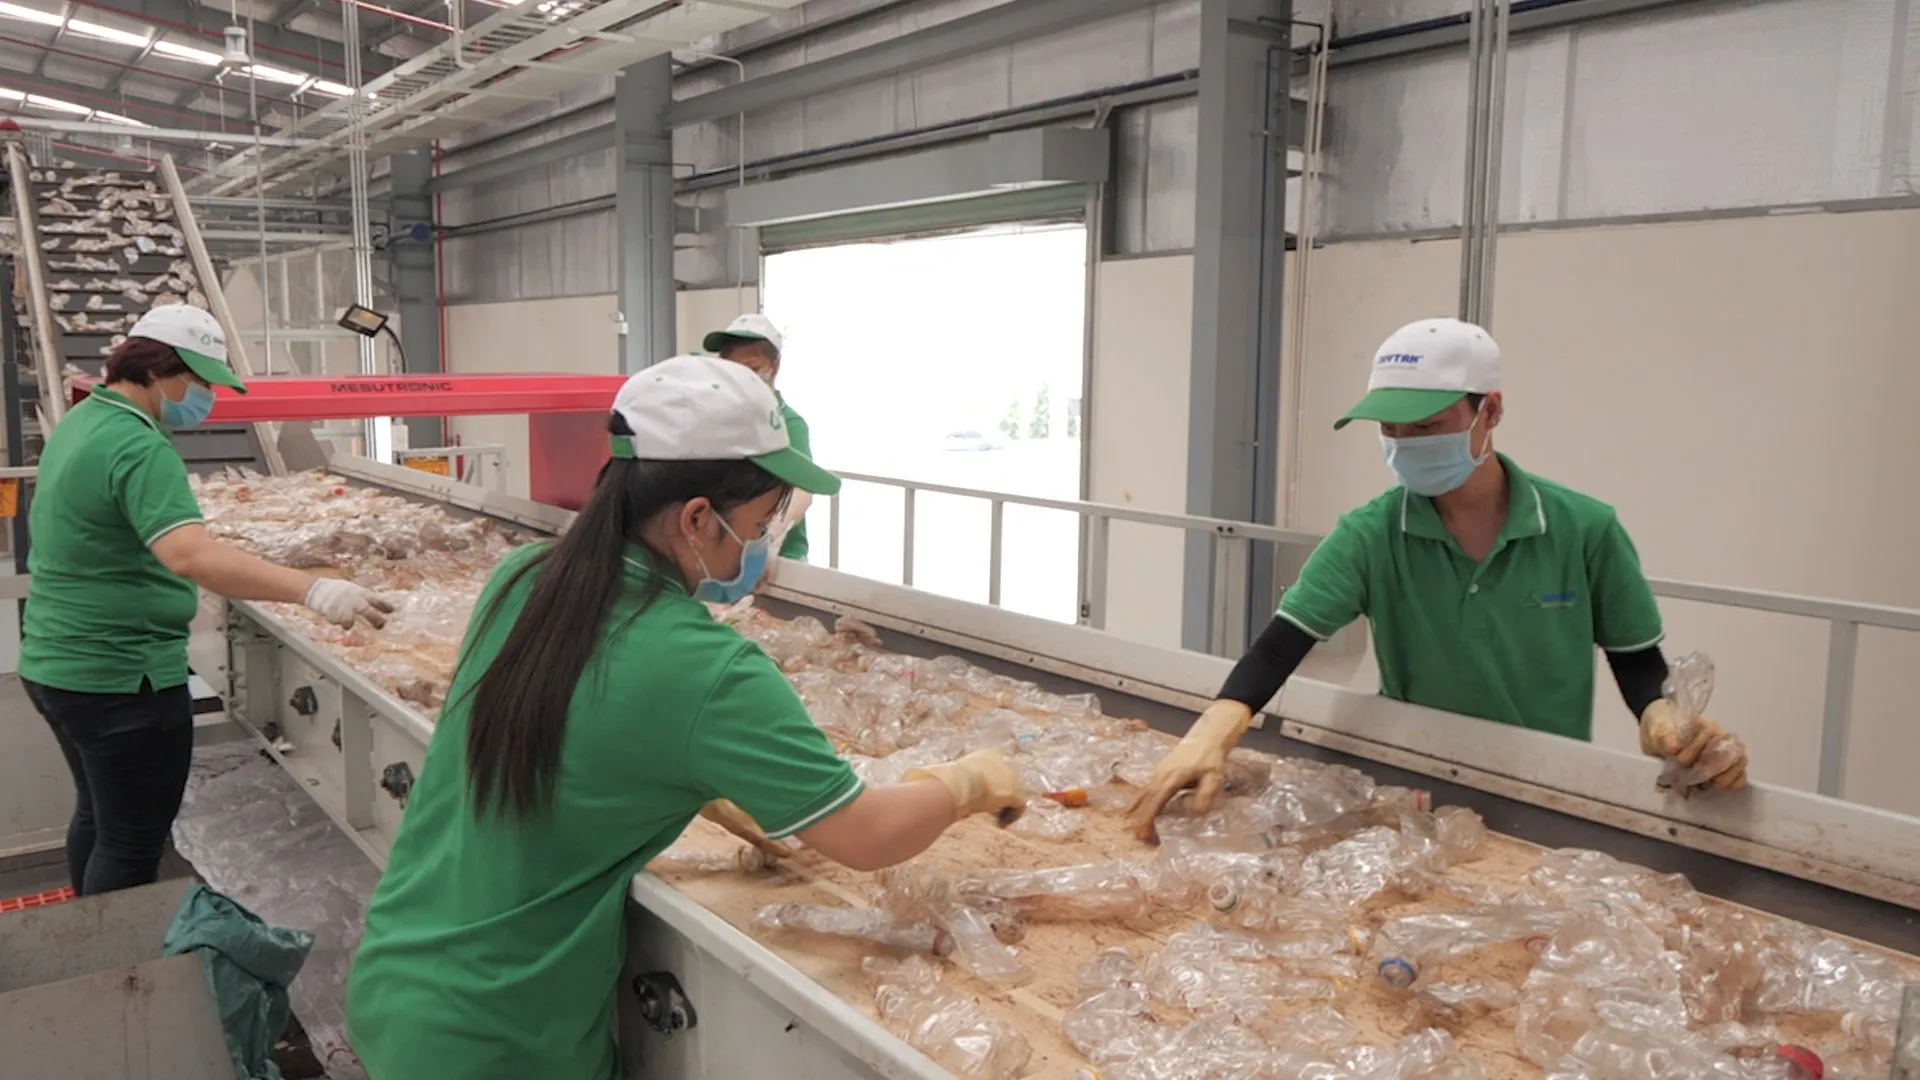 Duytan professionals manually sorting plastic waste on a conveyor belt.